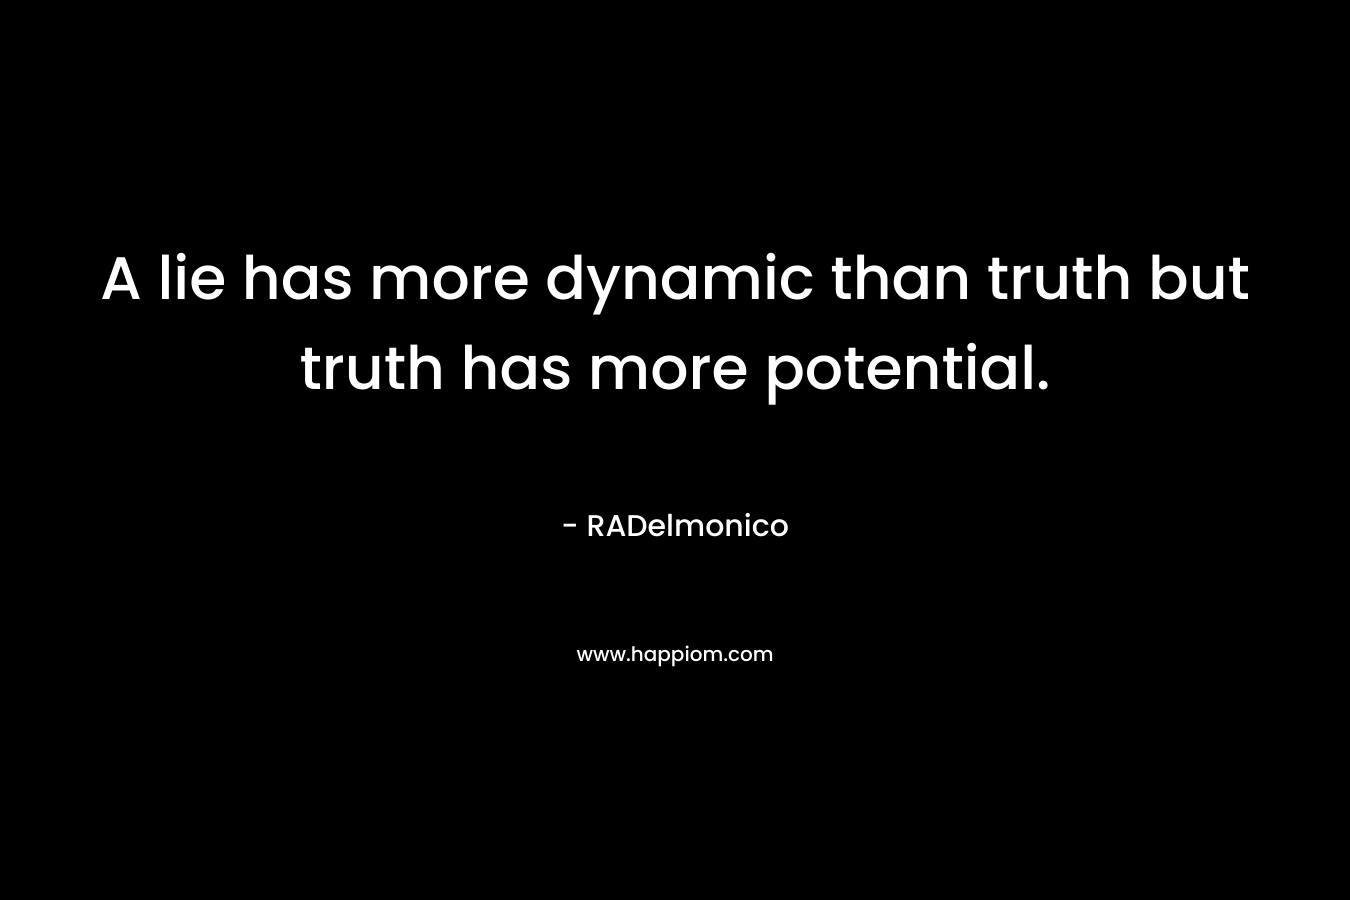 A lie has more dynamic than truth but truth has more potential.